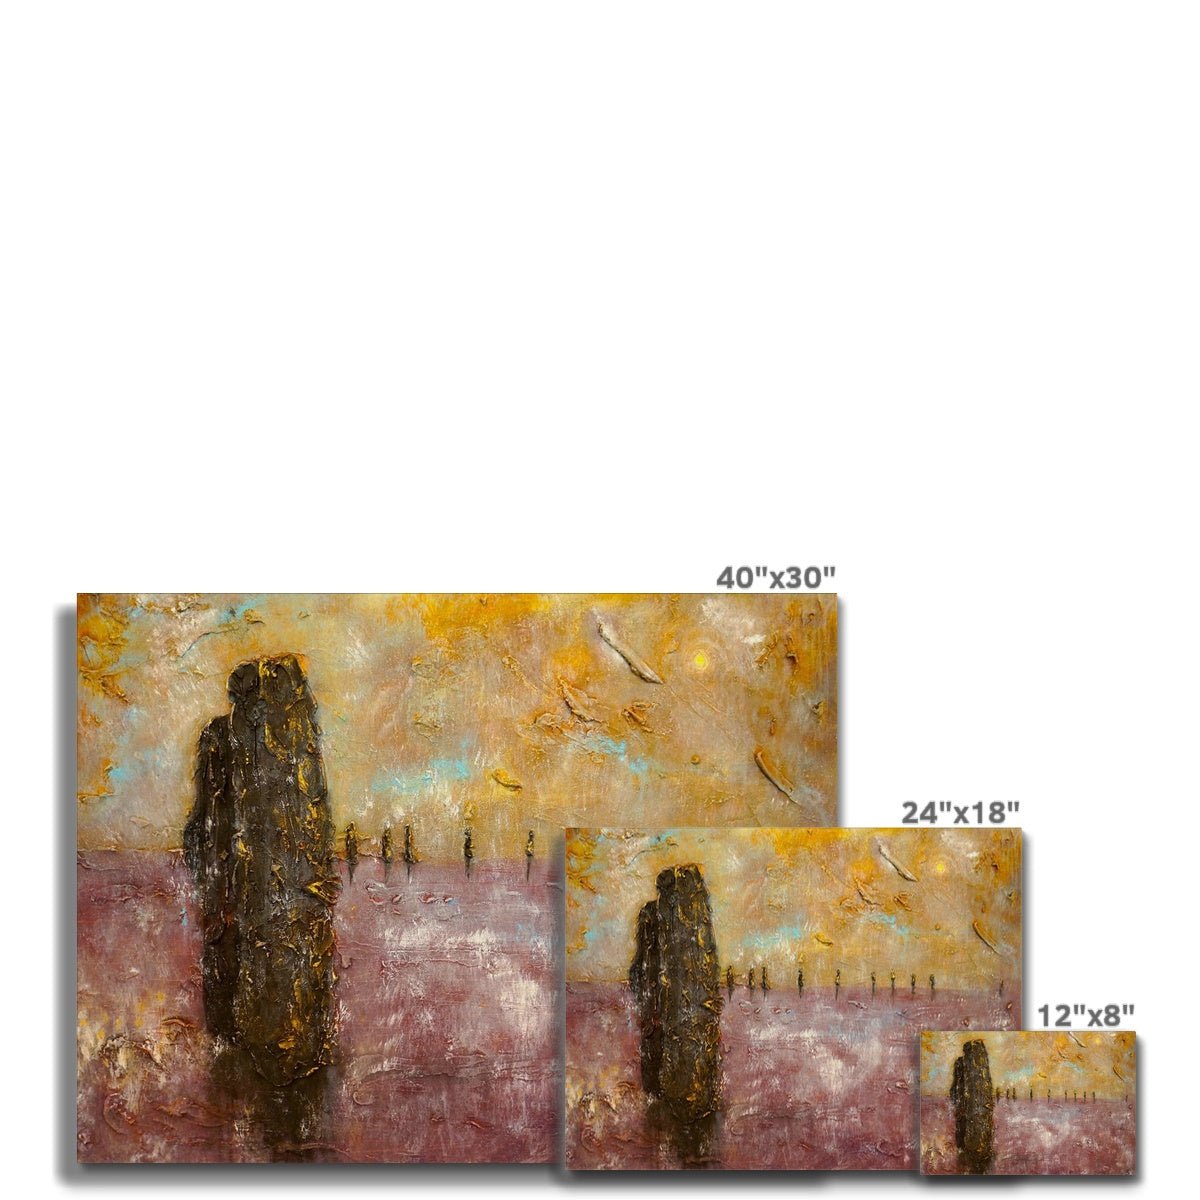 Brodgar Mist Orkney Painting | Canvas From Scotland-Contemporary Stretched Canvas Prints-Orkney Art Gallery-Paintings, Prints, Homeware, Art Gifts From Scotland By Scottish Artist Kevin Hunter